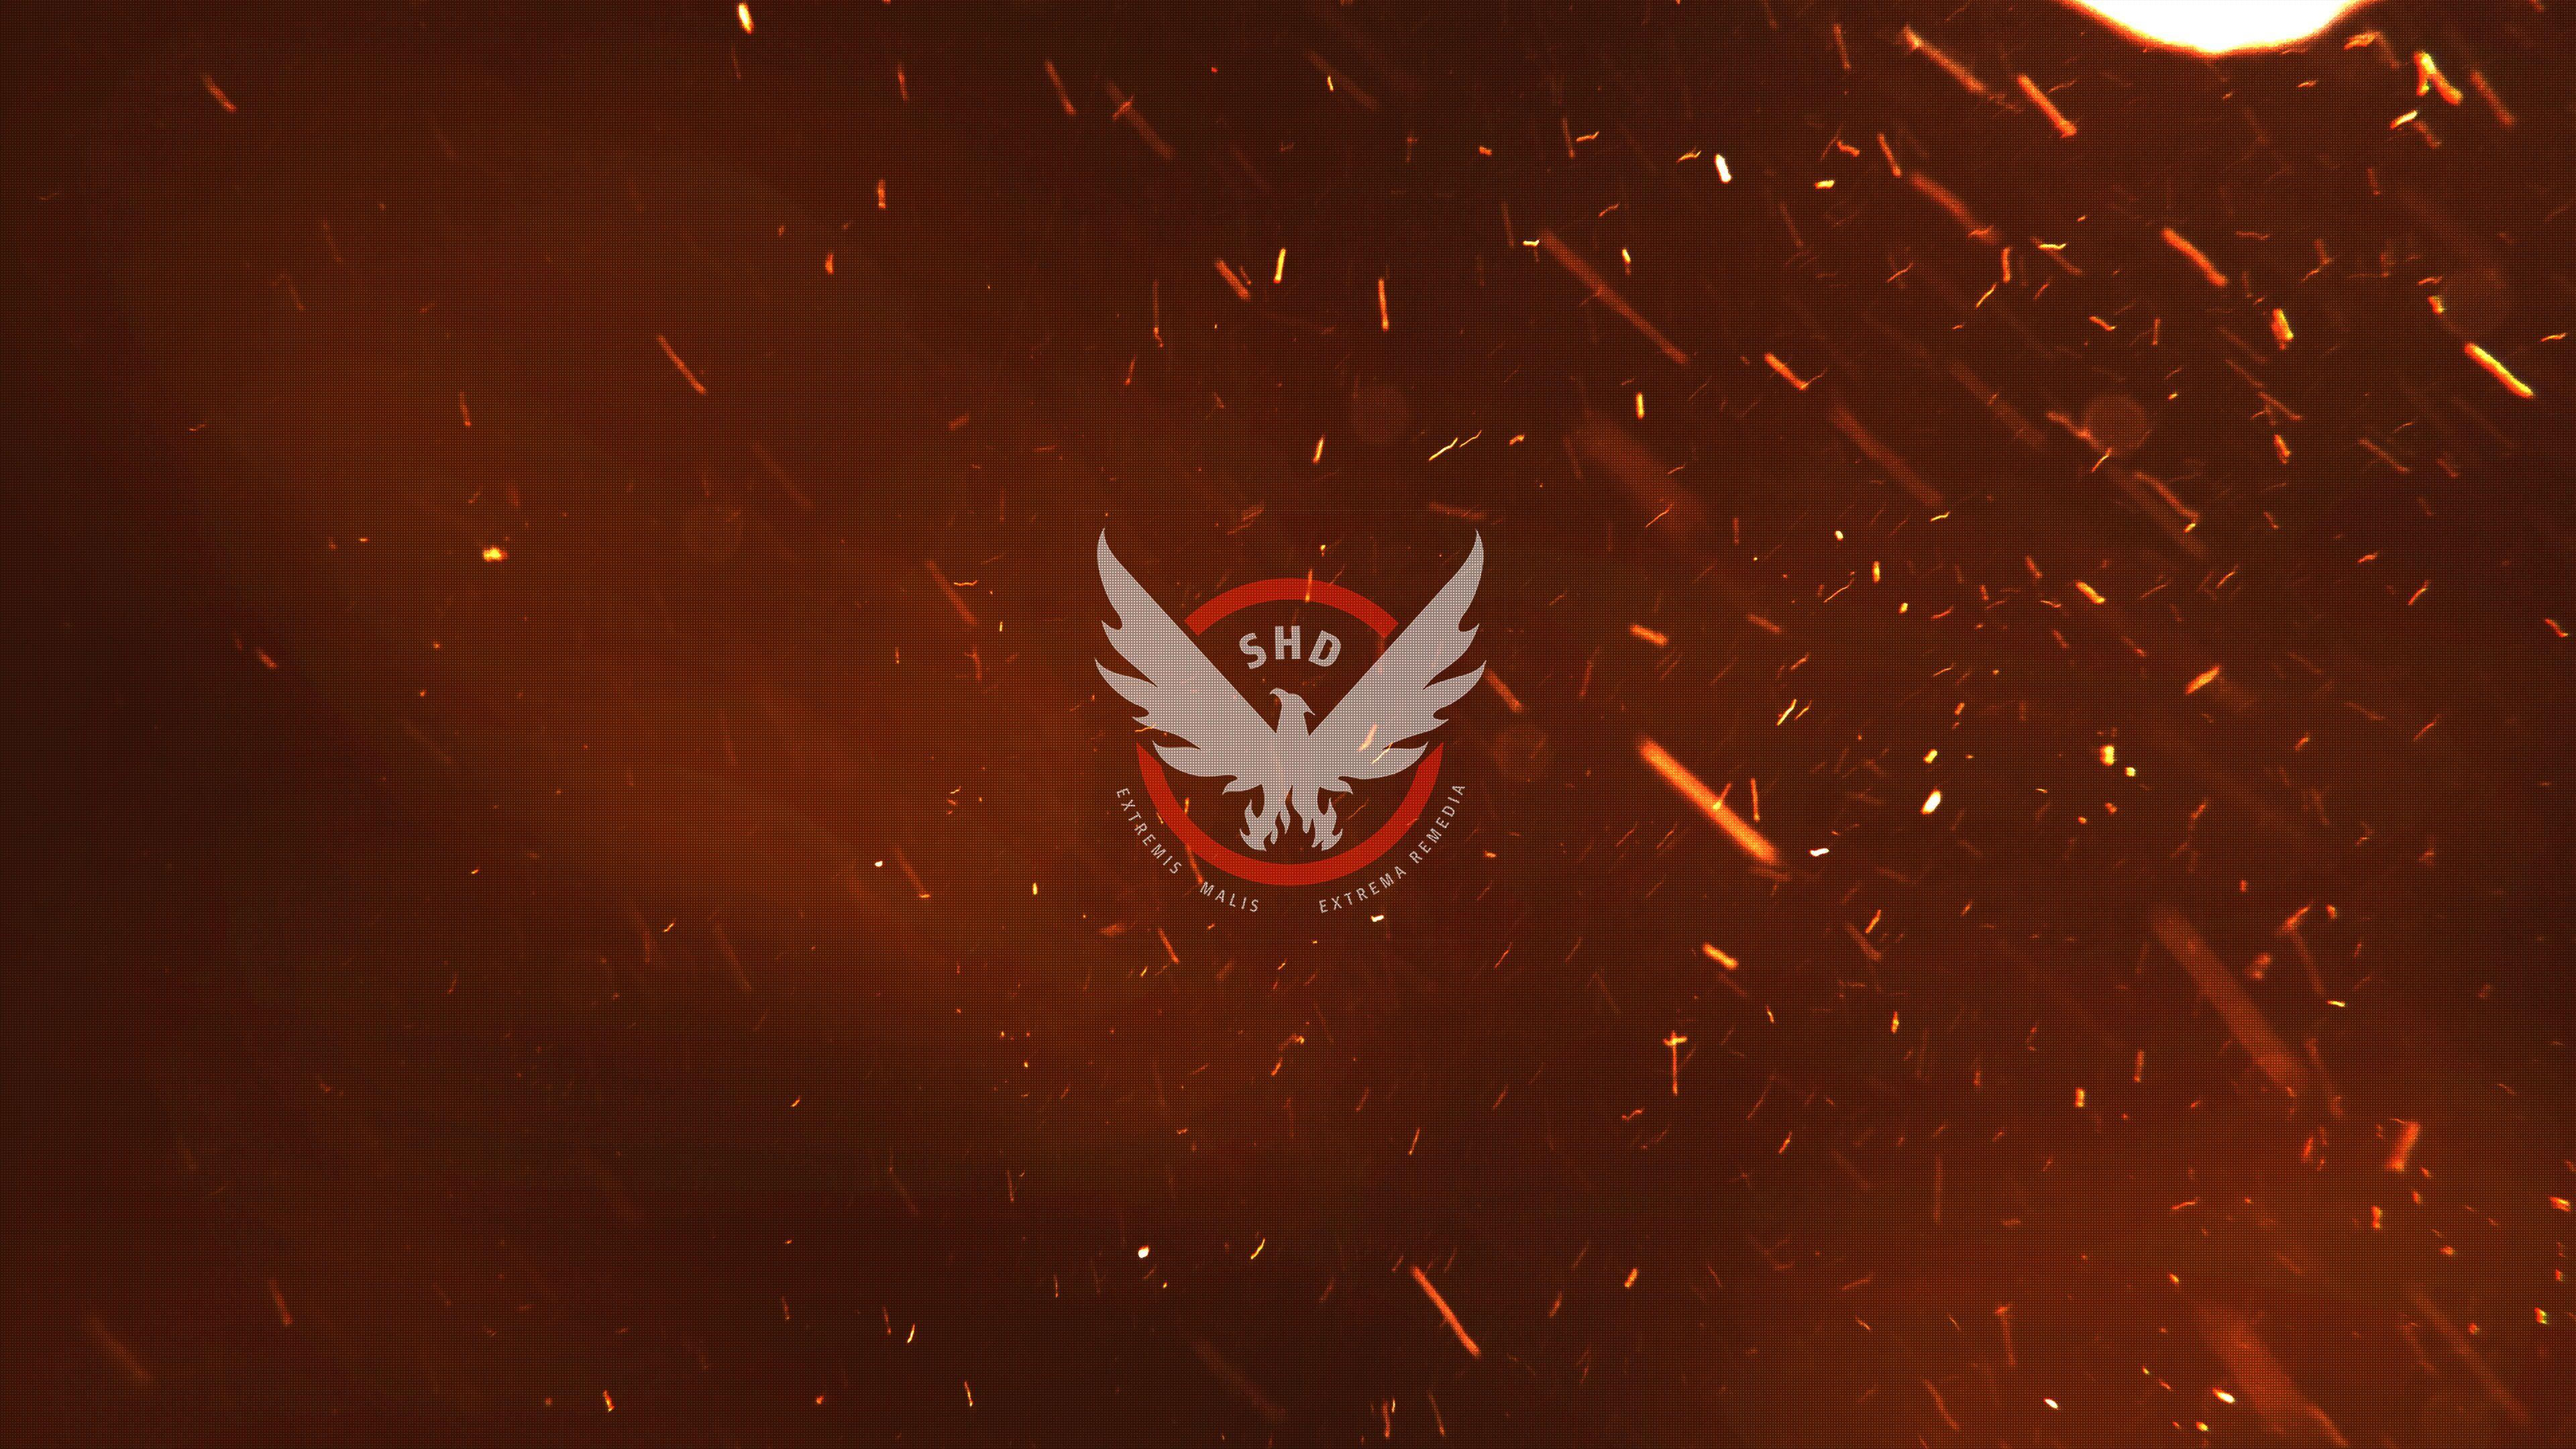 The Division Shd Logo - The Division - Wallpapers I made : thedivision